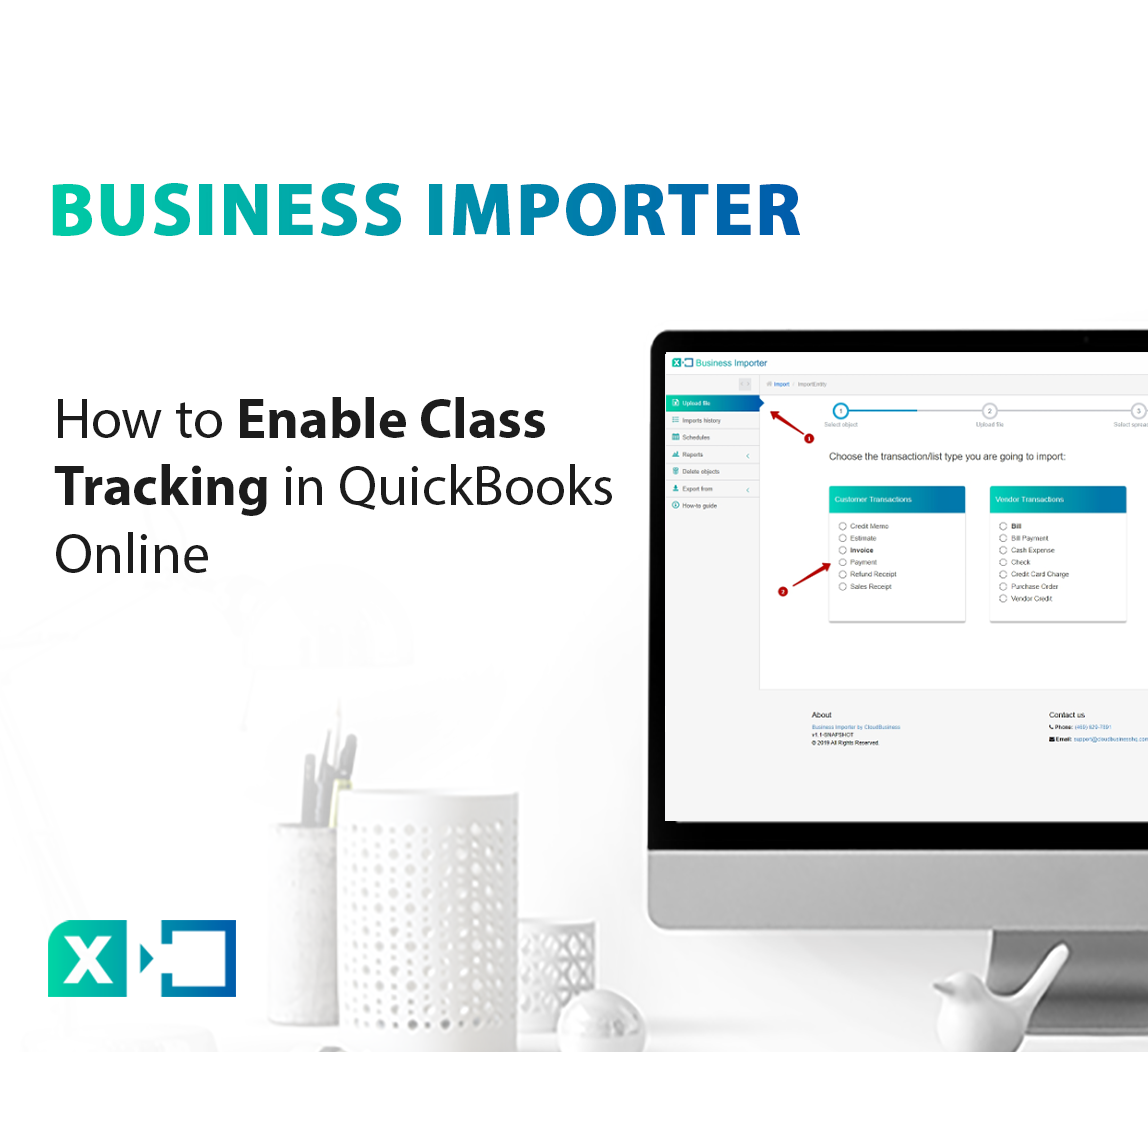 How to Enable Class Tracking in QuickBooks Online